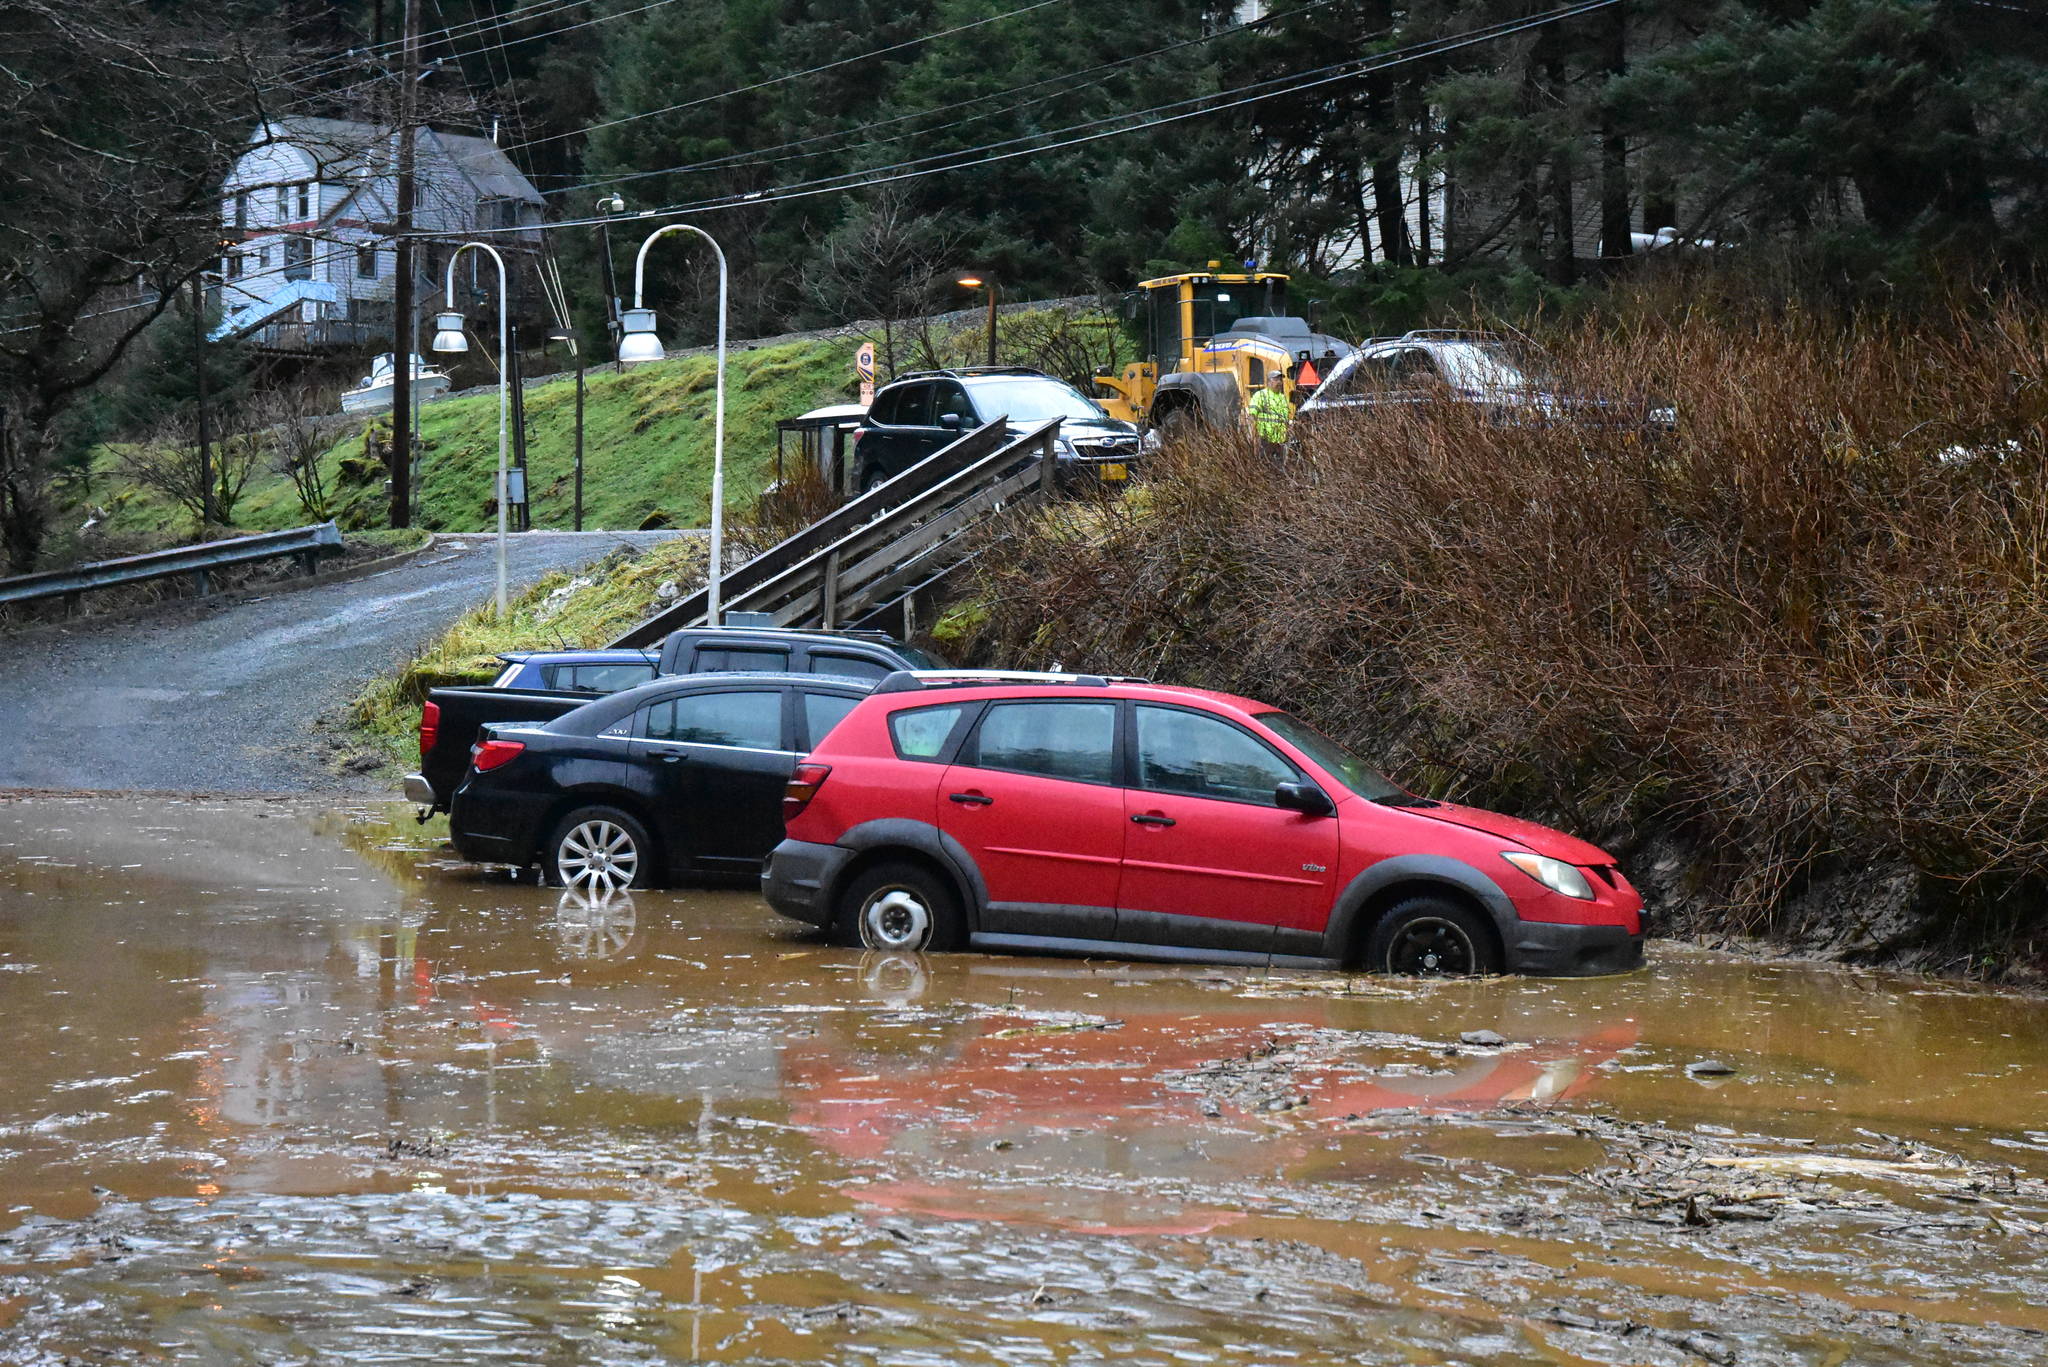 Muddy water and debris partially flooded a parking lot near Glacier Highway after heavy rains caused an early morning mudslide on Wednesday, Dec. 2, 2020. (Peter Segall / Juneau Empire)